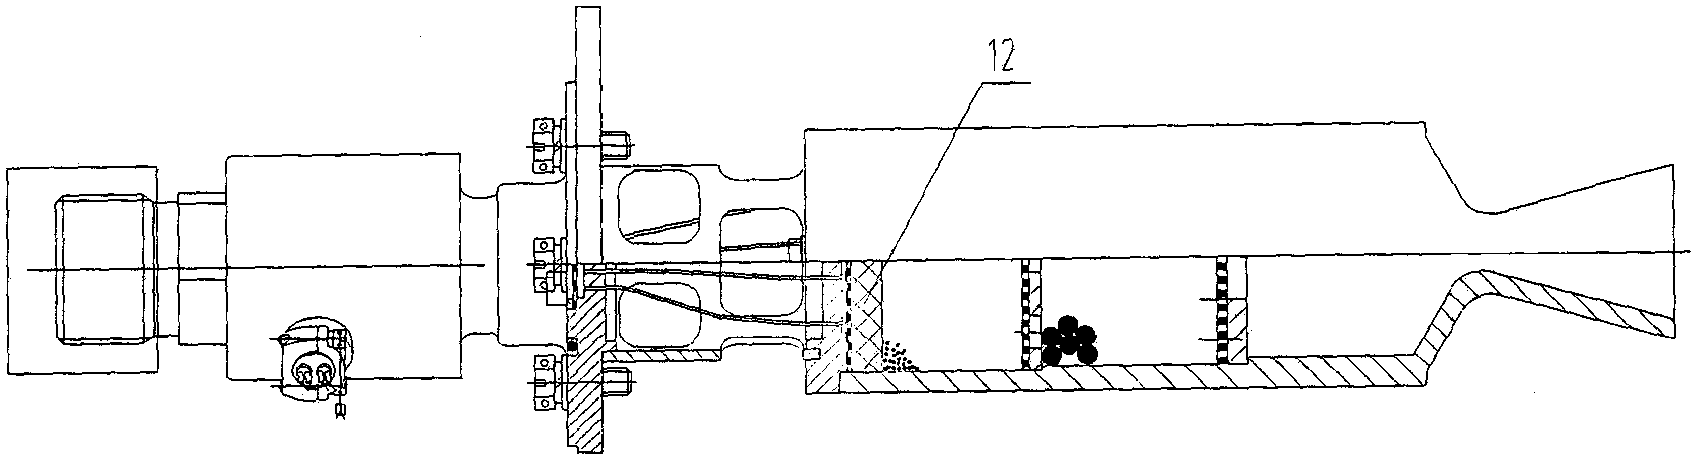 A monocomponent engine with non-toxic unit propellant